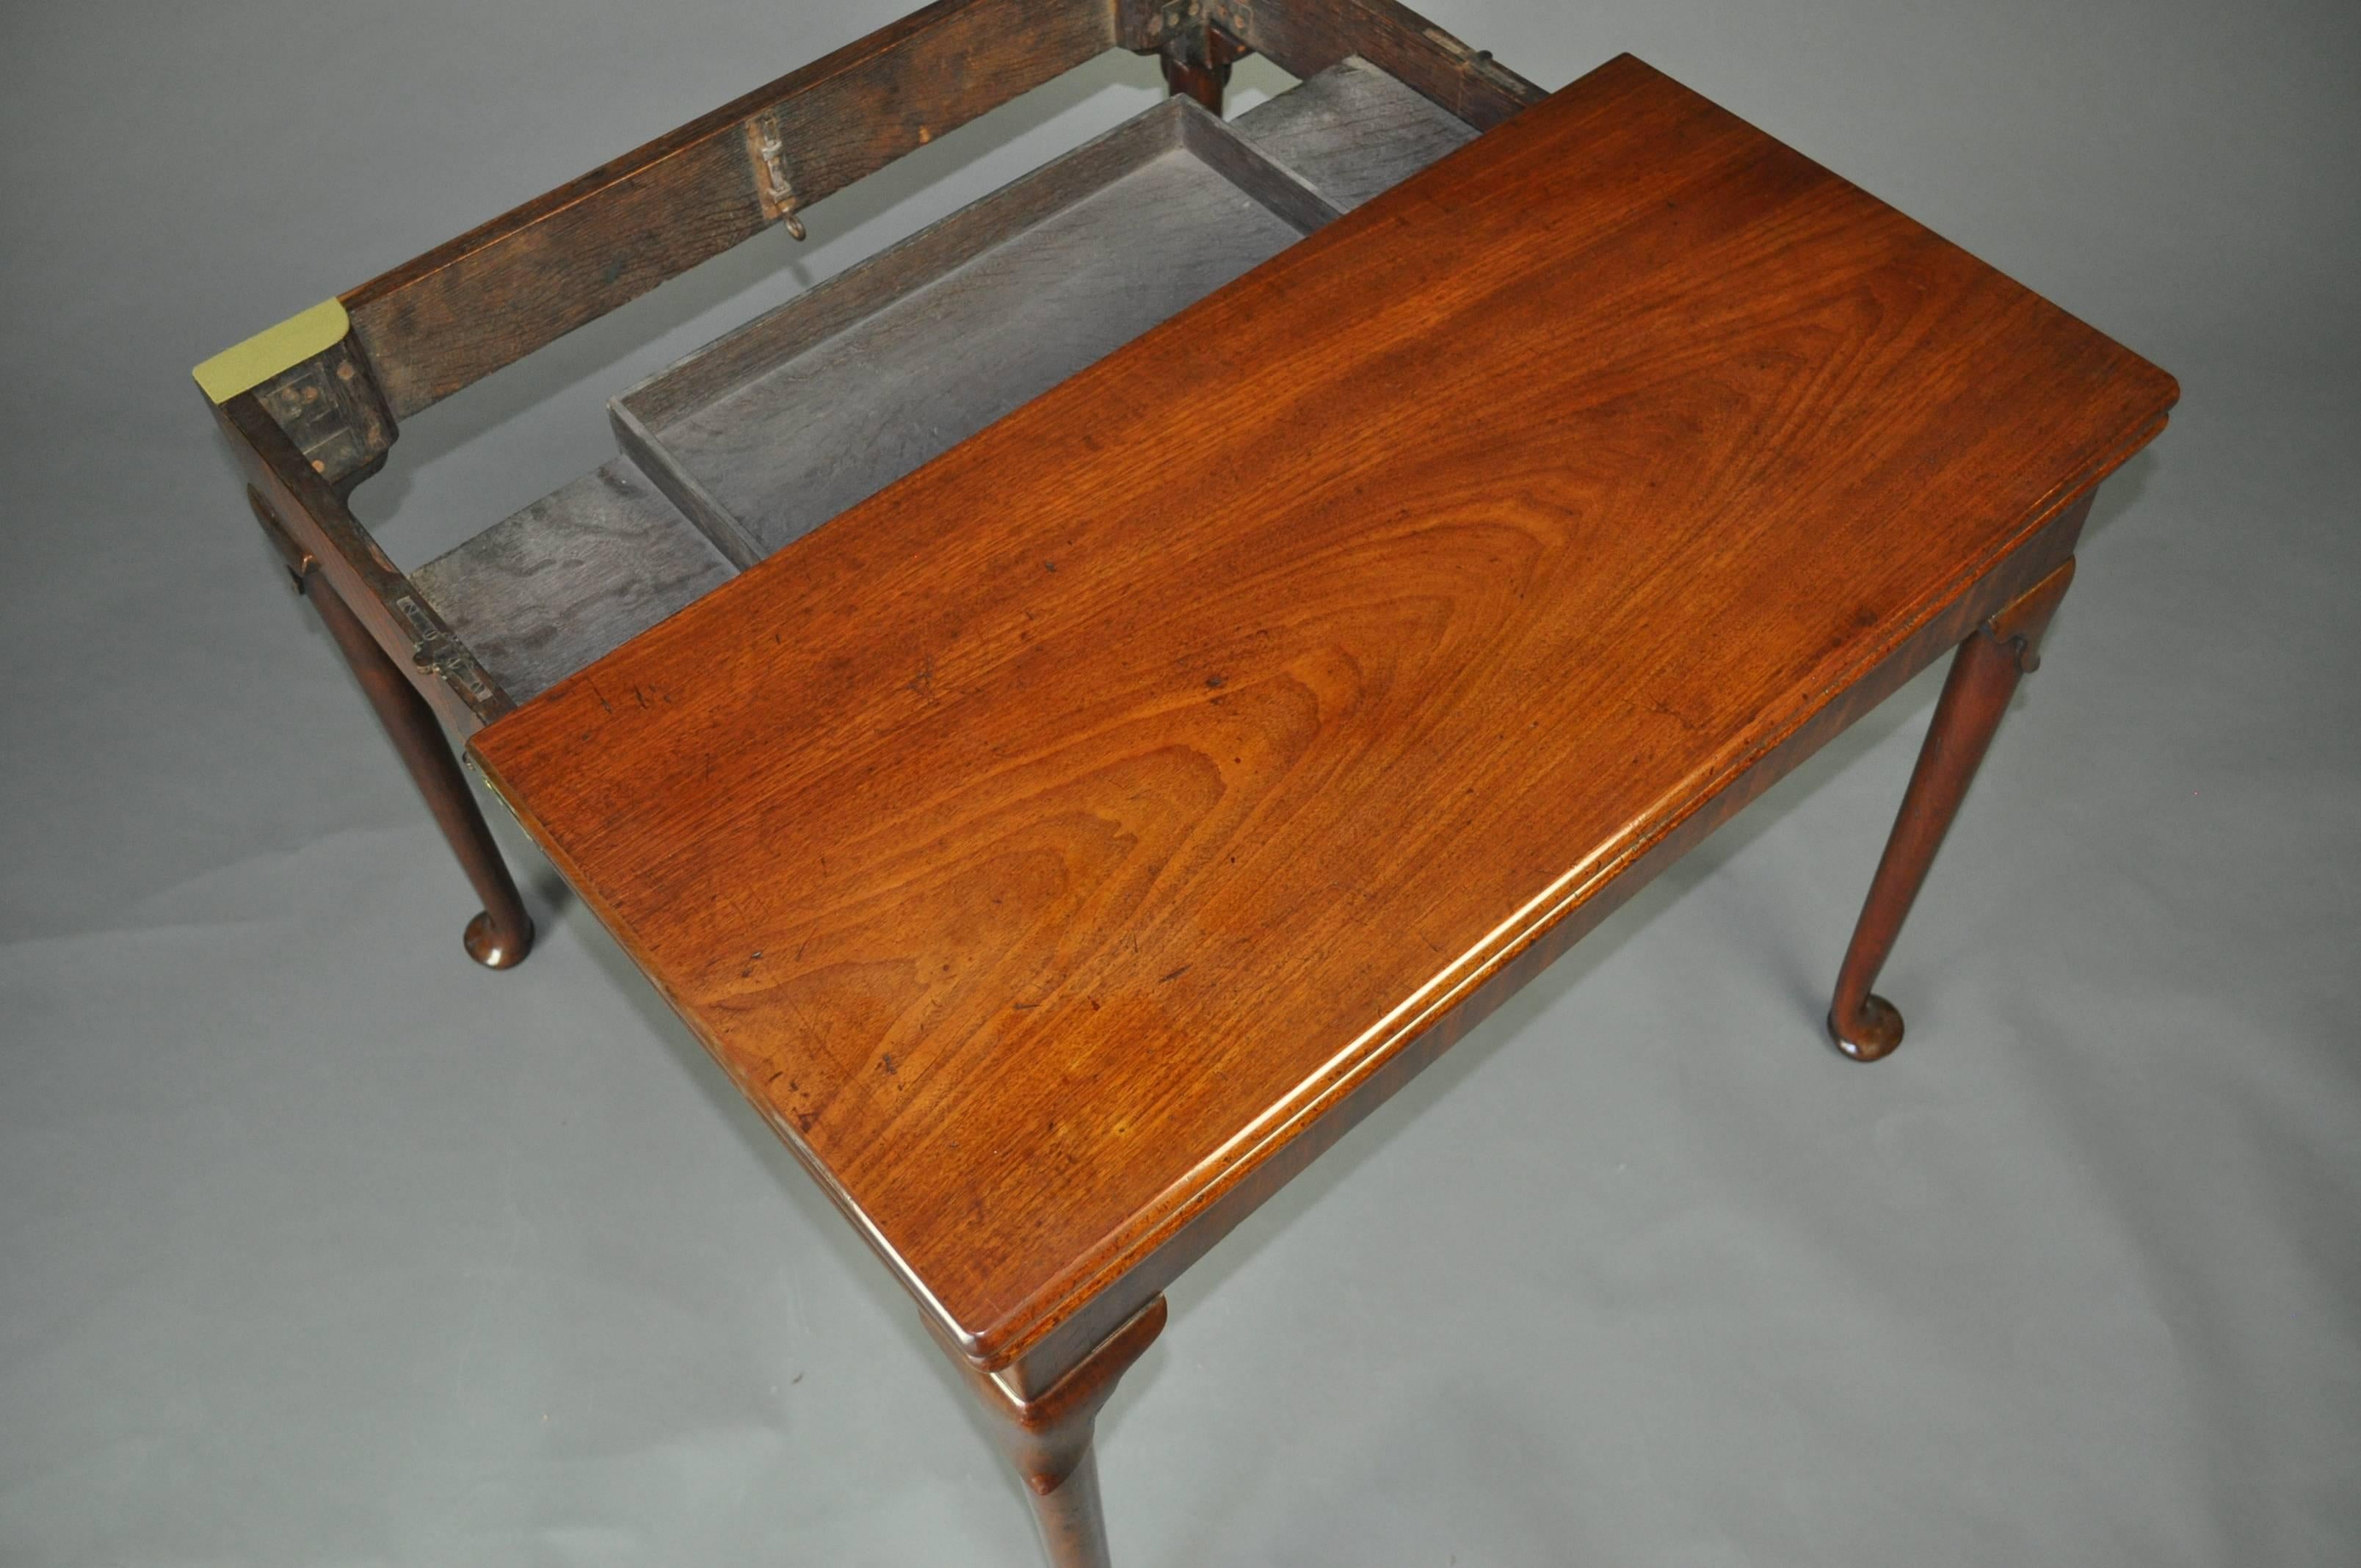 British Matched Pair of Mid-18th Century Mahogany Card Tables For Sale